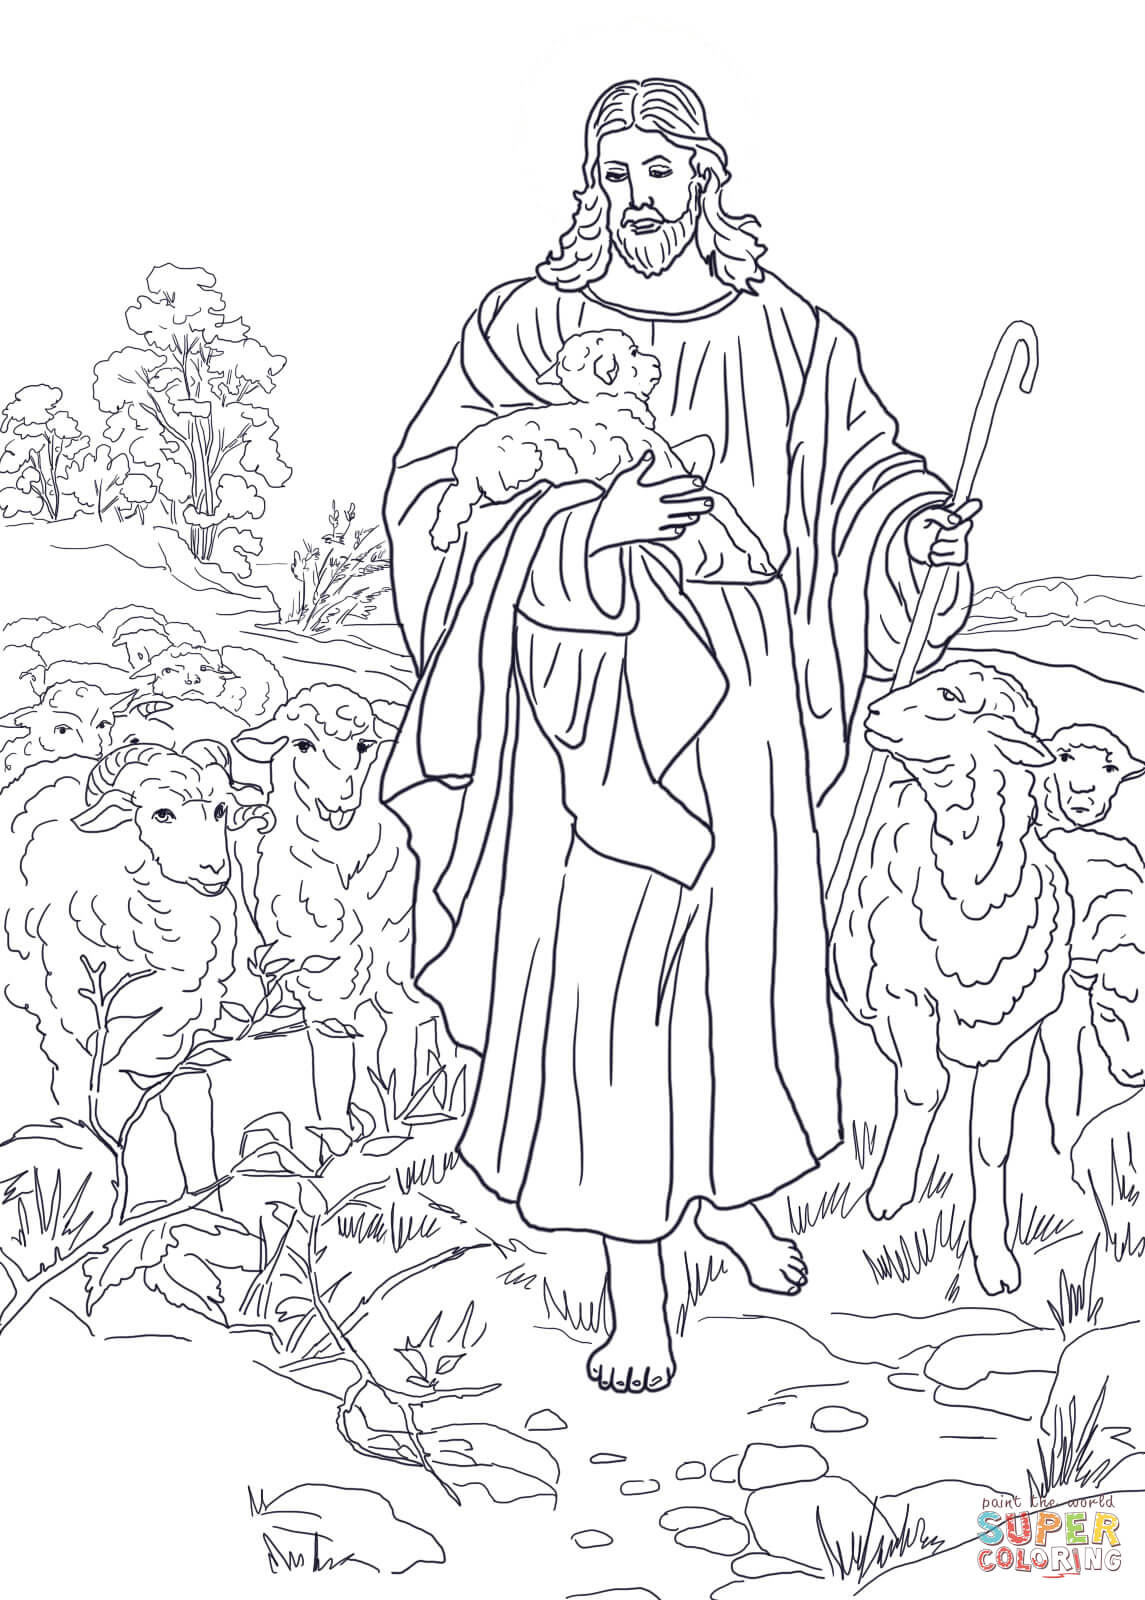 Coloring Pages Sheep And The Shepherd Coloring Ideas Sheep And Shepherd Coloring Page Ideas Jesus Is The